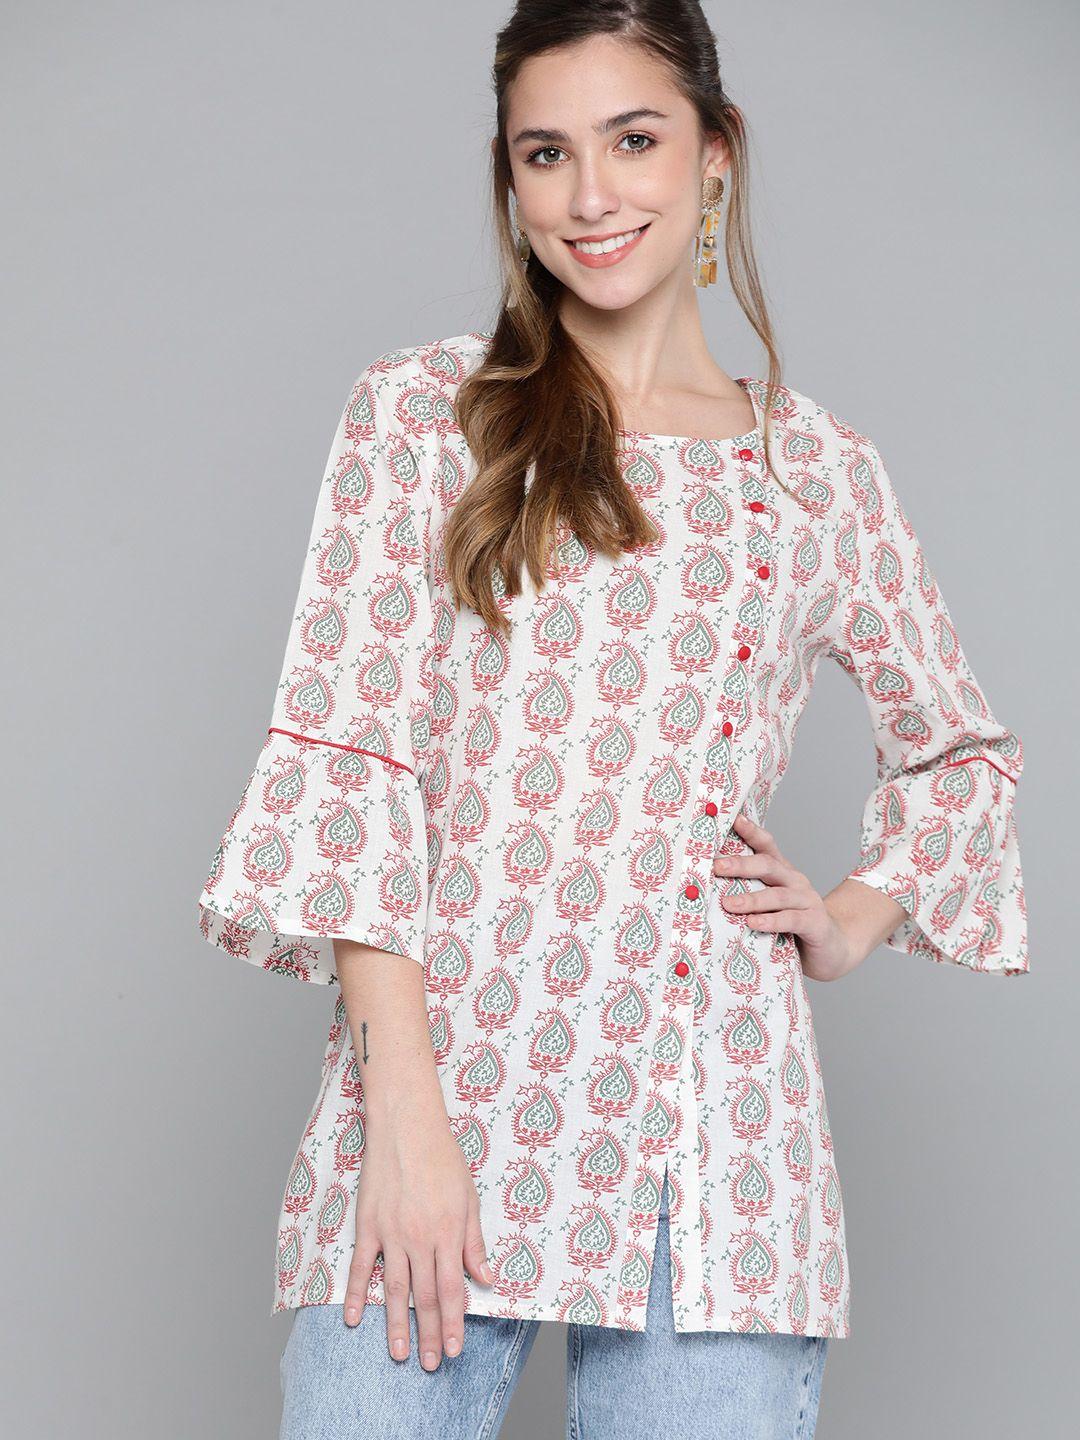 here&now-white-&-red-ethnic-motifs-print-flared-sleeves-pure-cotton-kurti